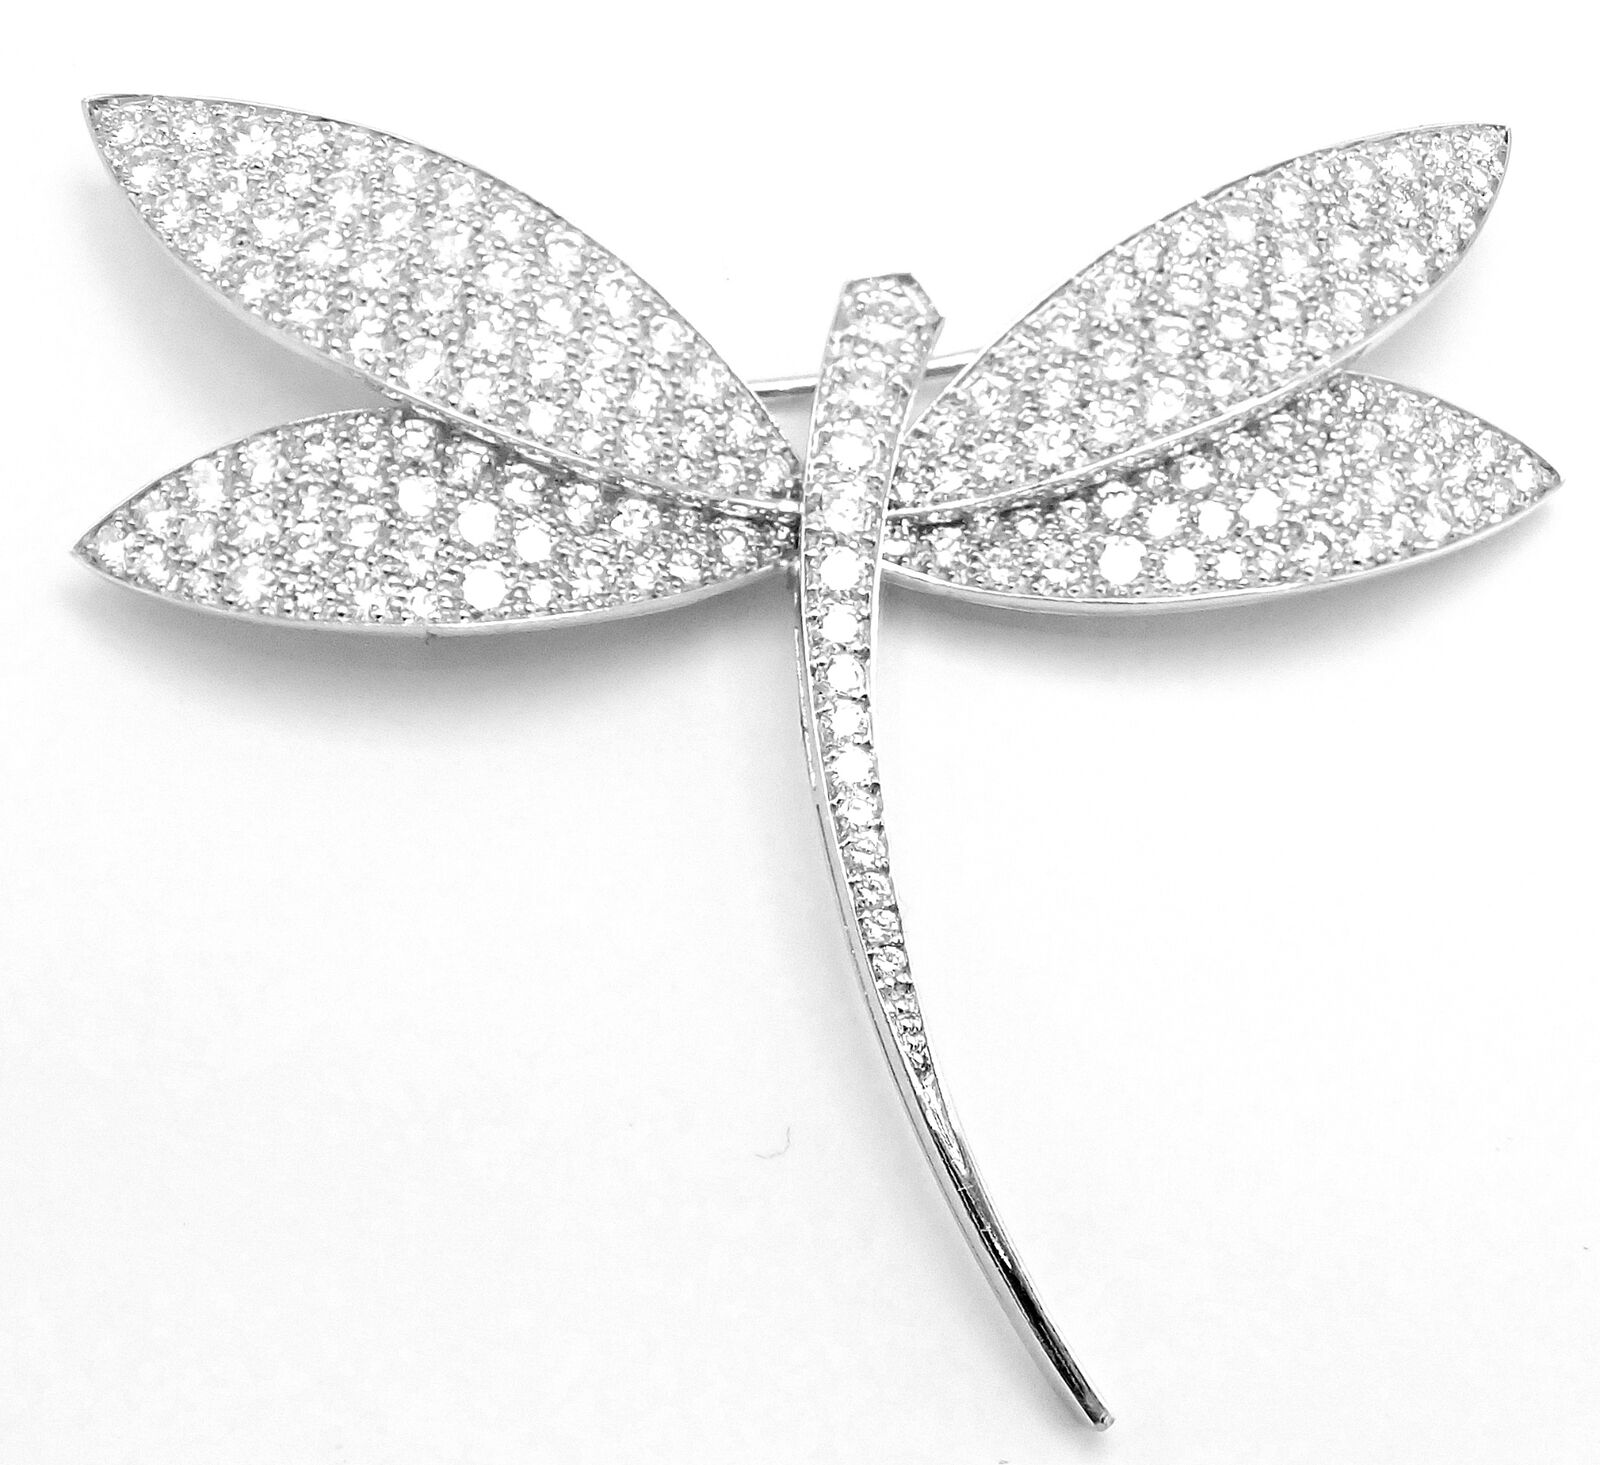 Van Cleef & Arpels Jewelry & Watches:Fine Jewelry:Brooches & Pins Authentic! Van Cleef & Arpels Dragonfly 18k White Gold Diamond Large Pin Brooch